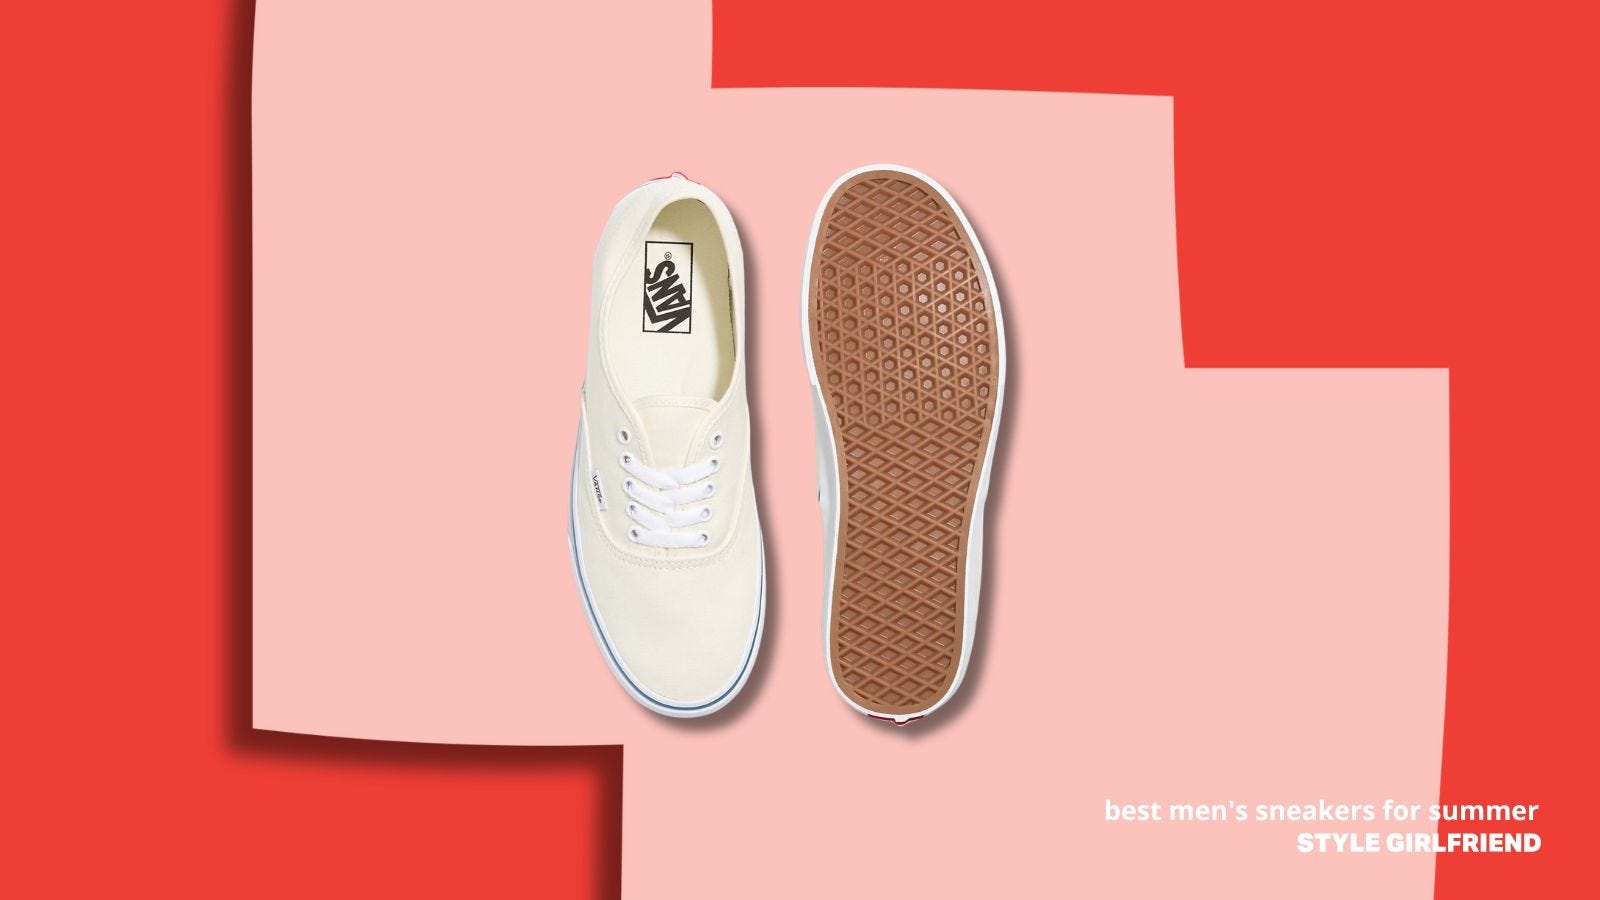 a pair of off-white men's canvas sneakers against a pink and red background, text on-screen reads: best men's sneakers for summer, Style Girlfriend